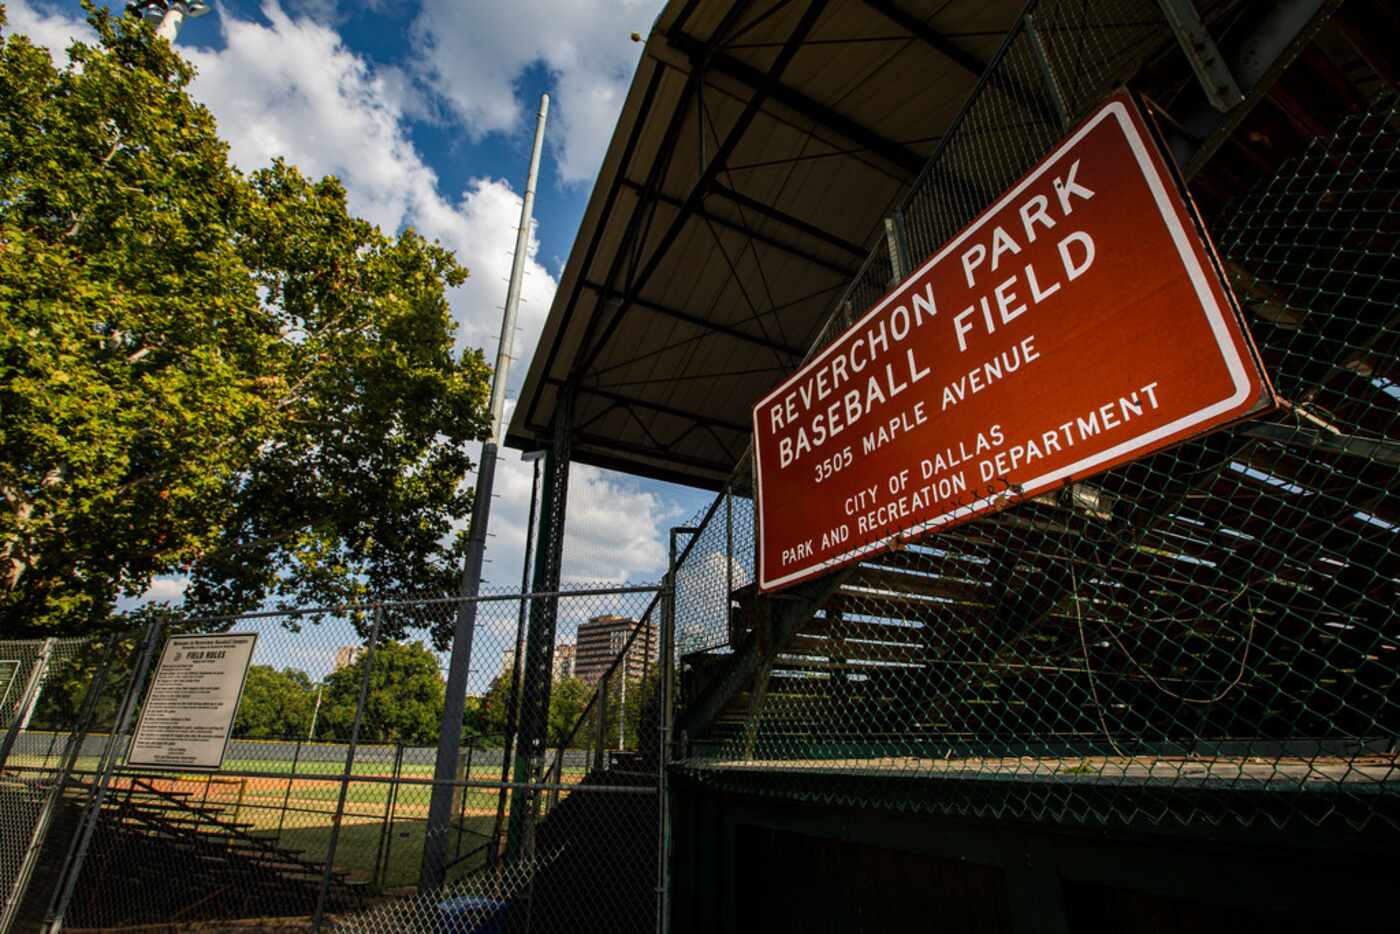 The new plan would lay down artificial turf and allow the facility to be used for baseball,...